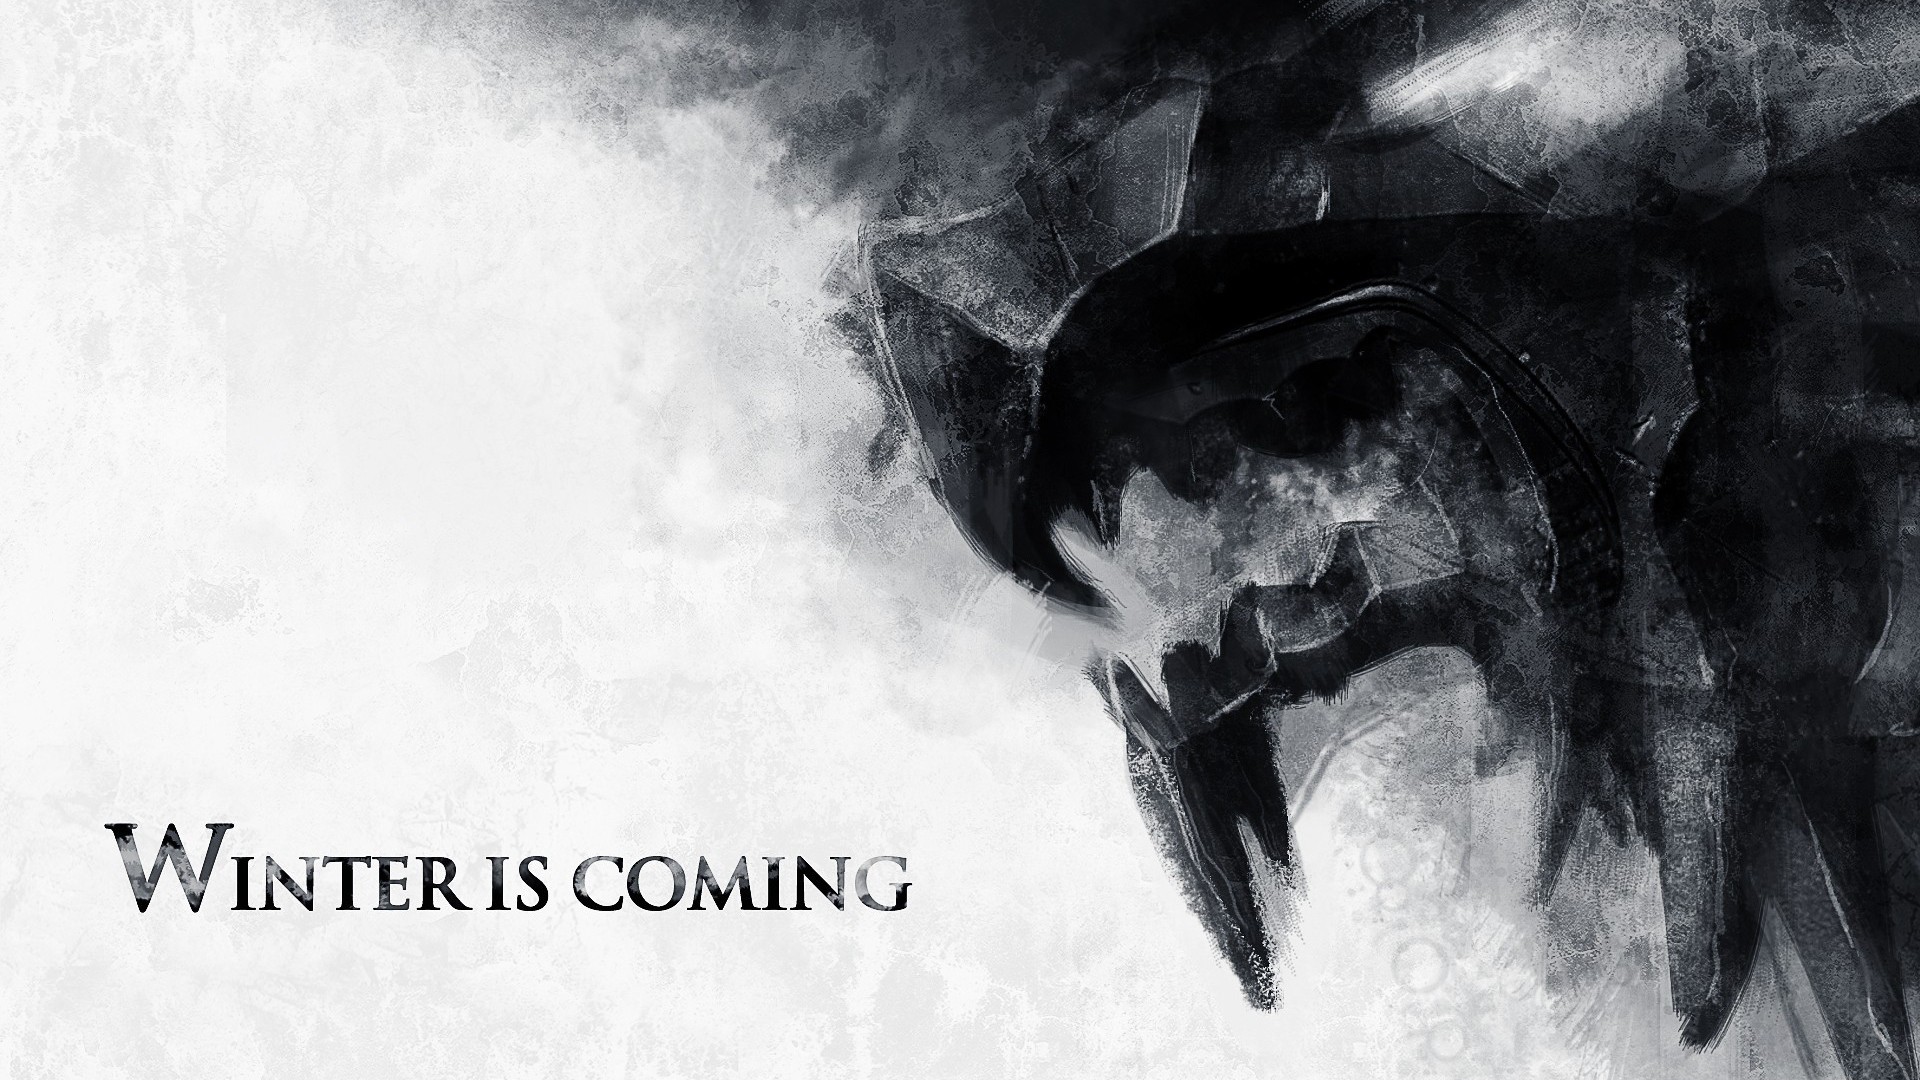 General 1920x1080 Game of Thrones Winter Is Coming winter wolf TV series